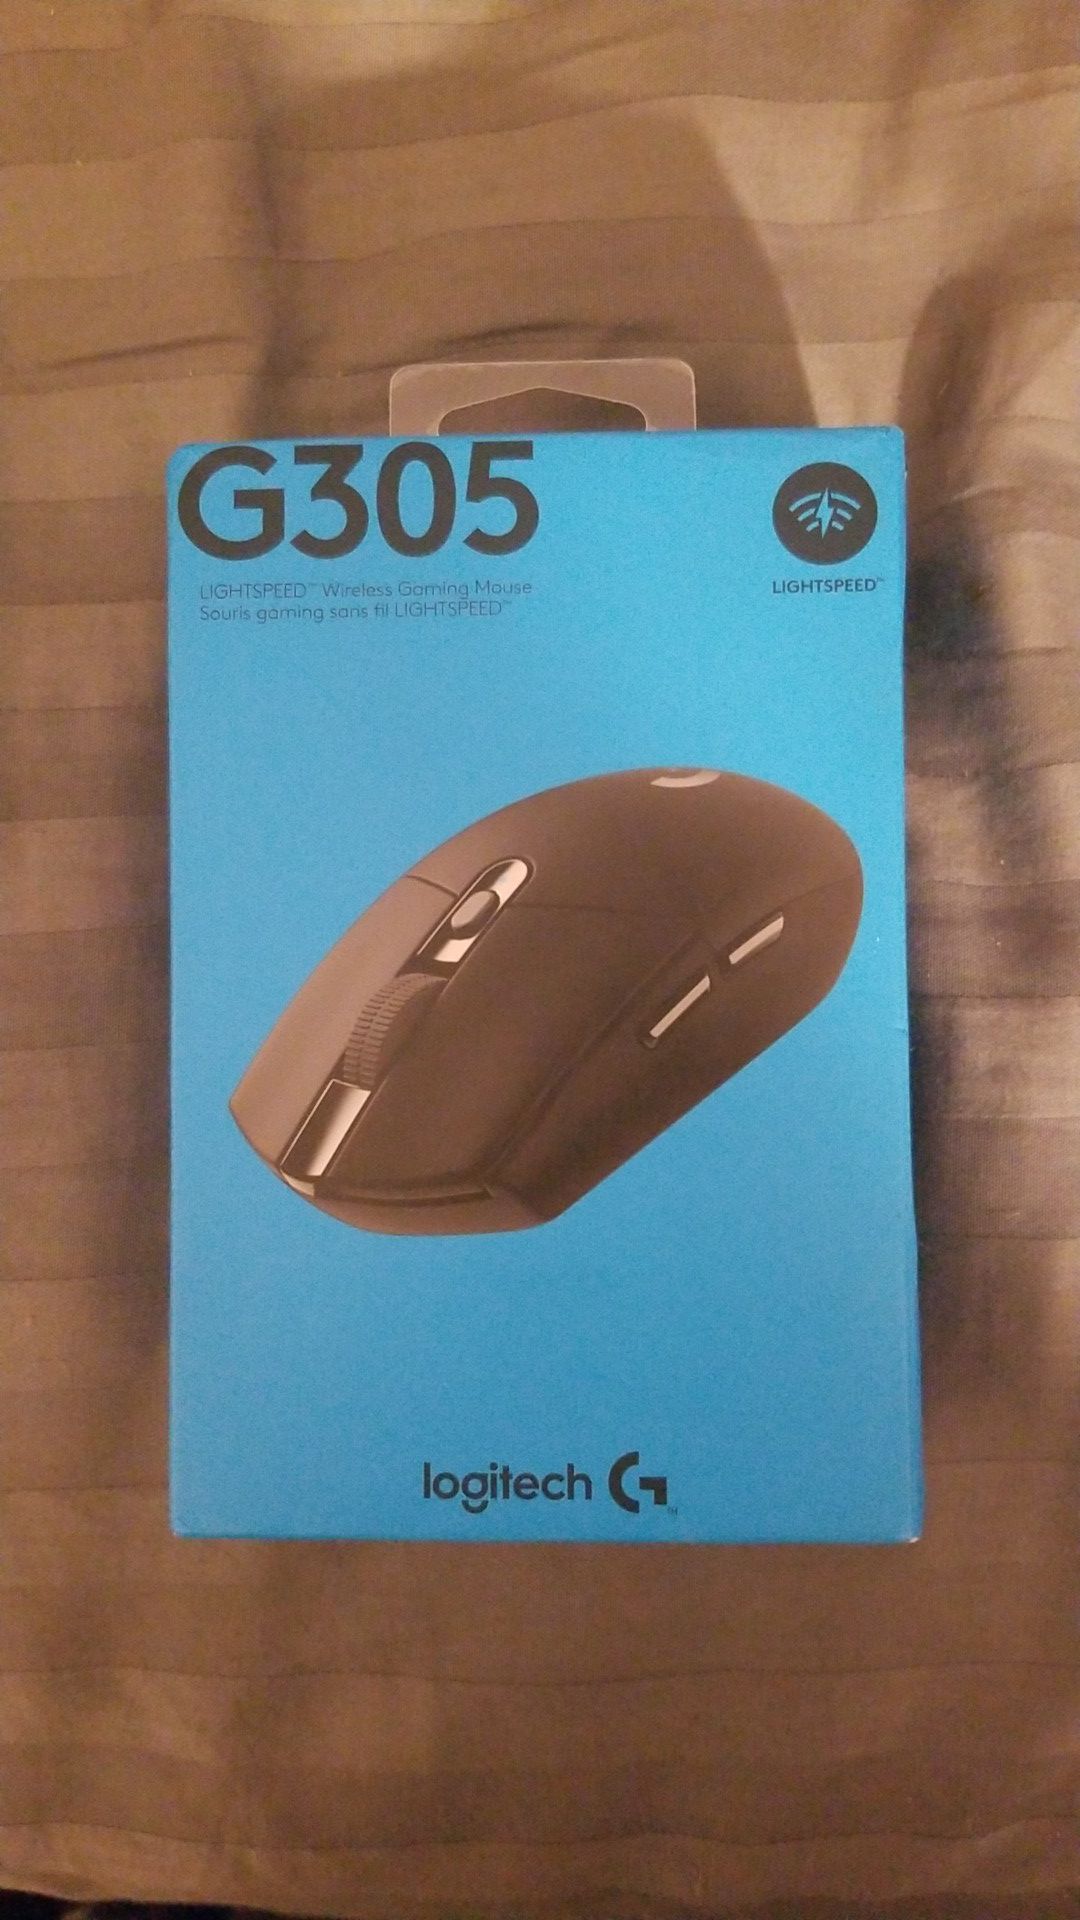 Brand new Logitech G305 gaming mouse